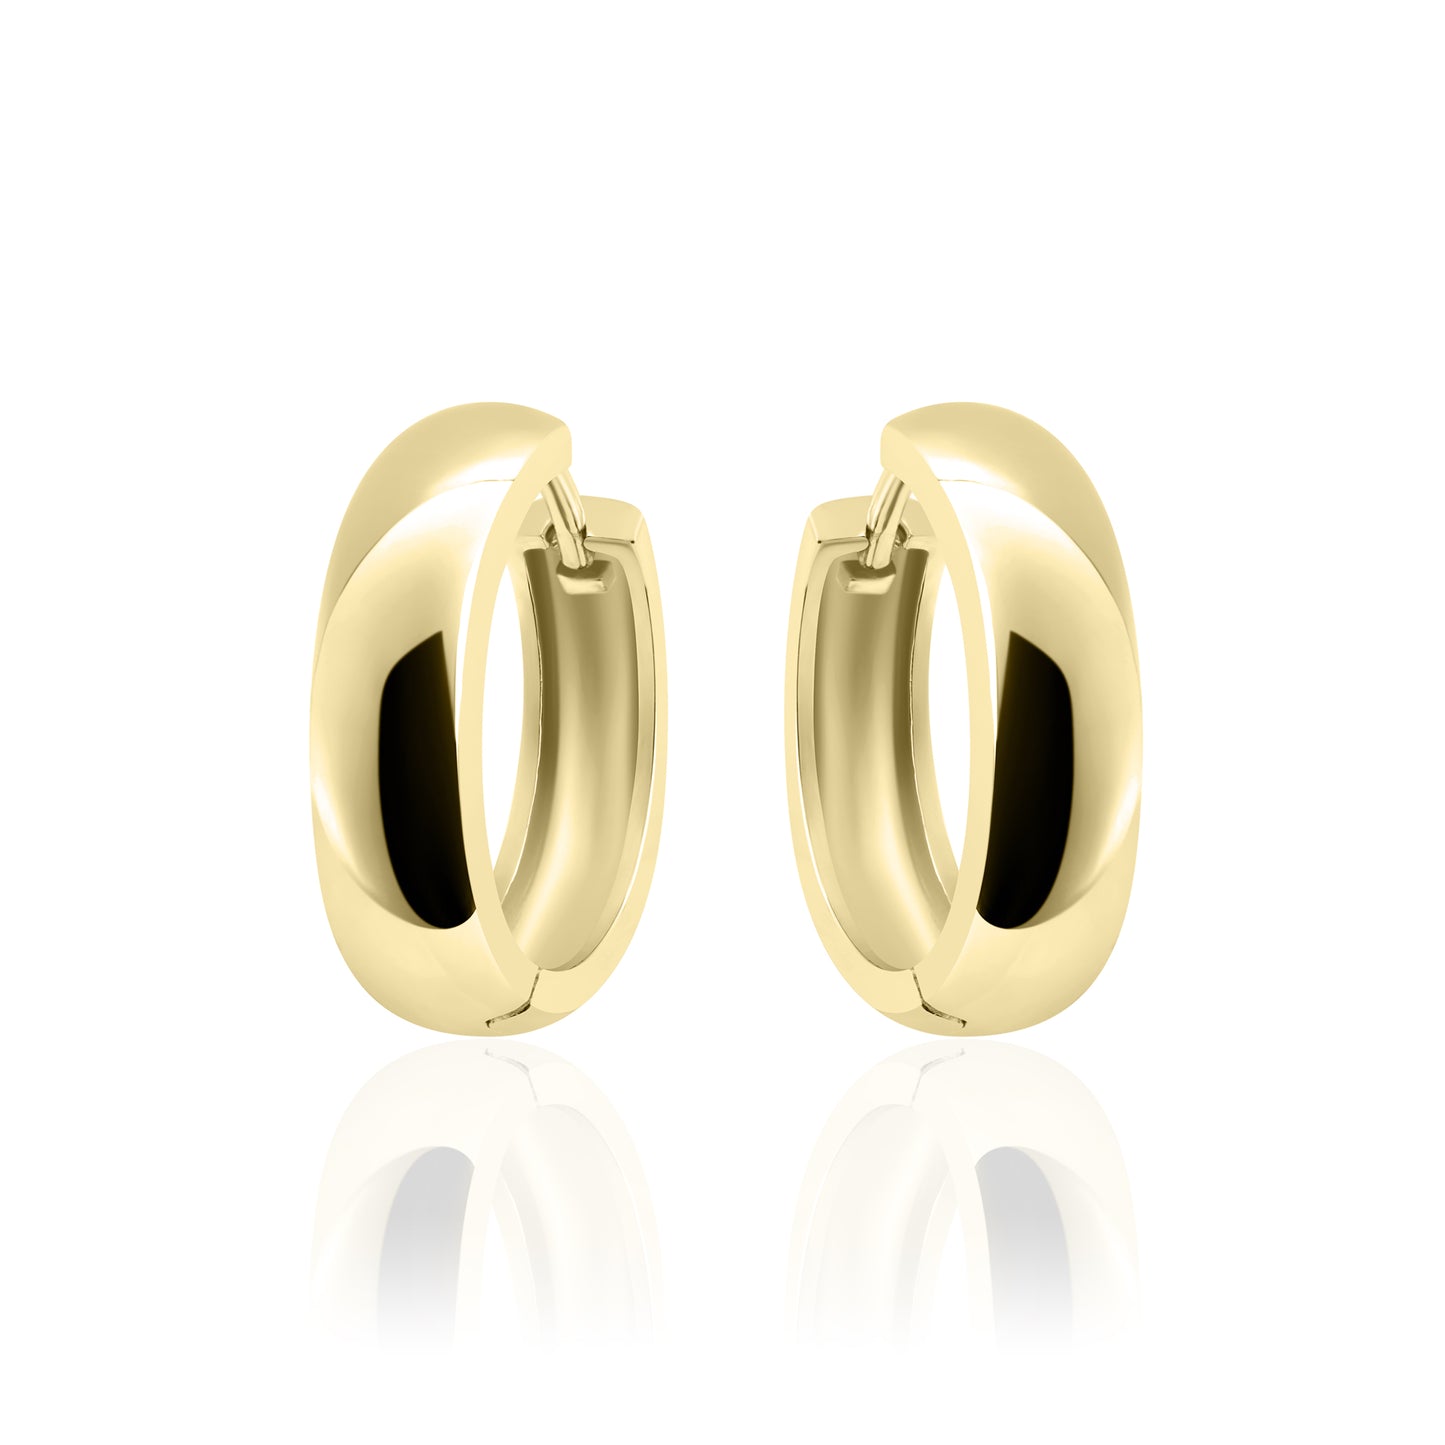 Yellow Gold Plated Silver Hinged Hoop Earrings